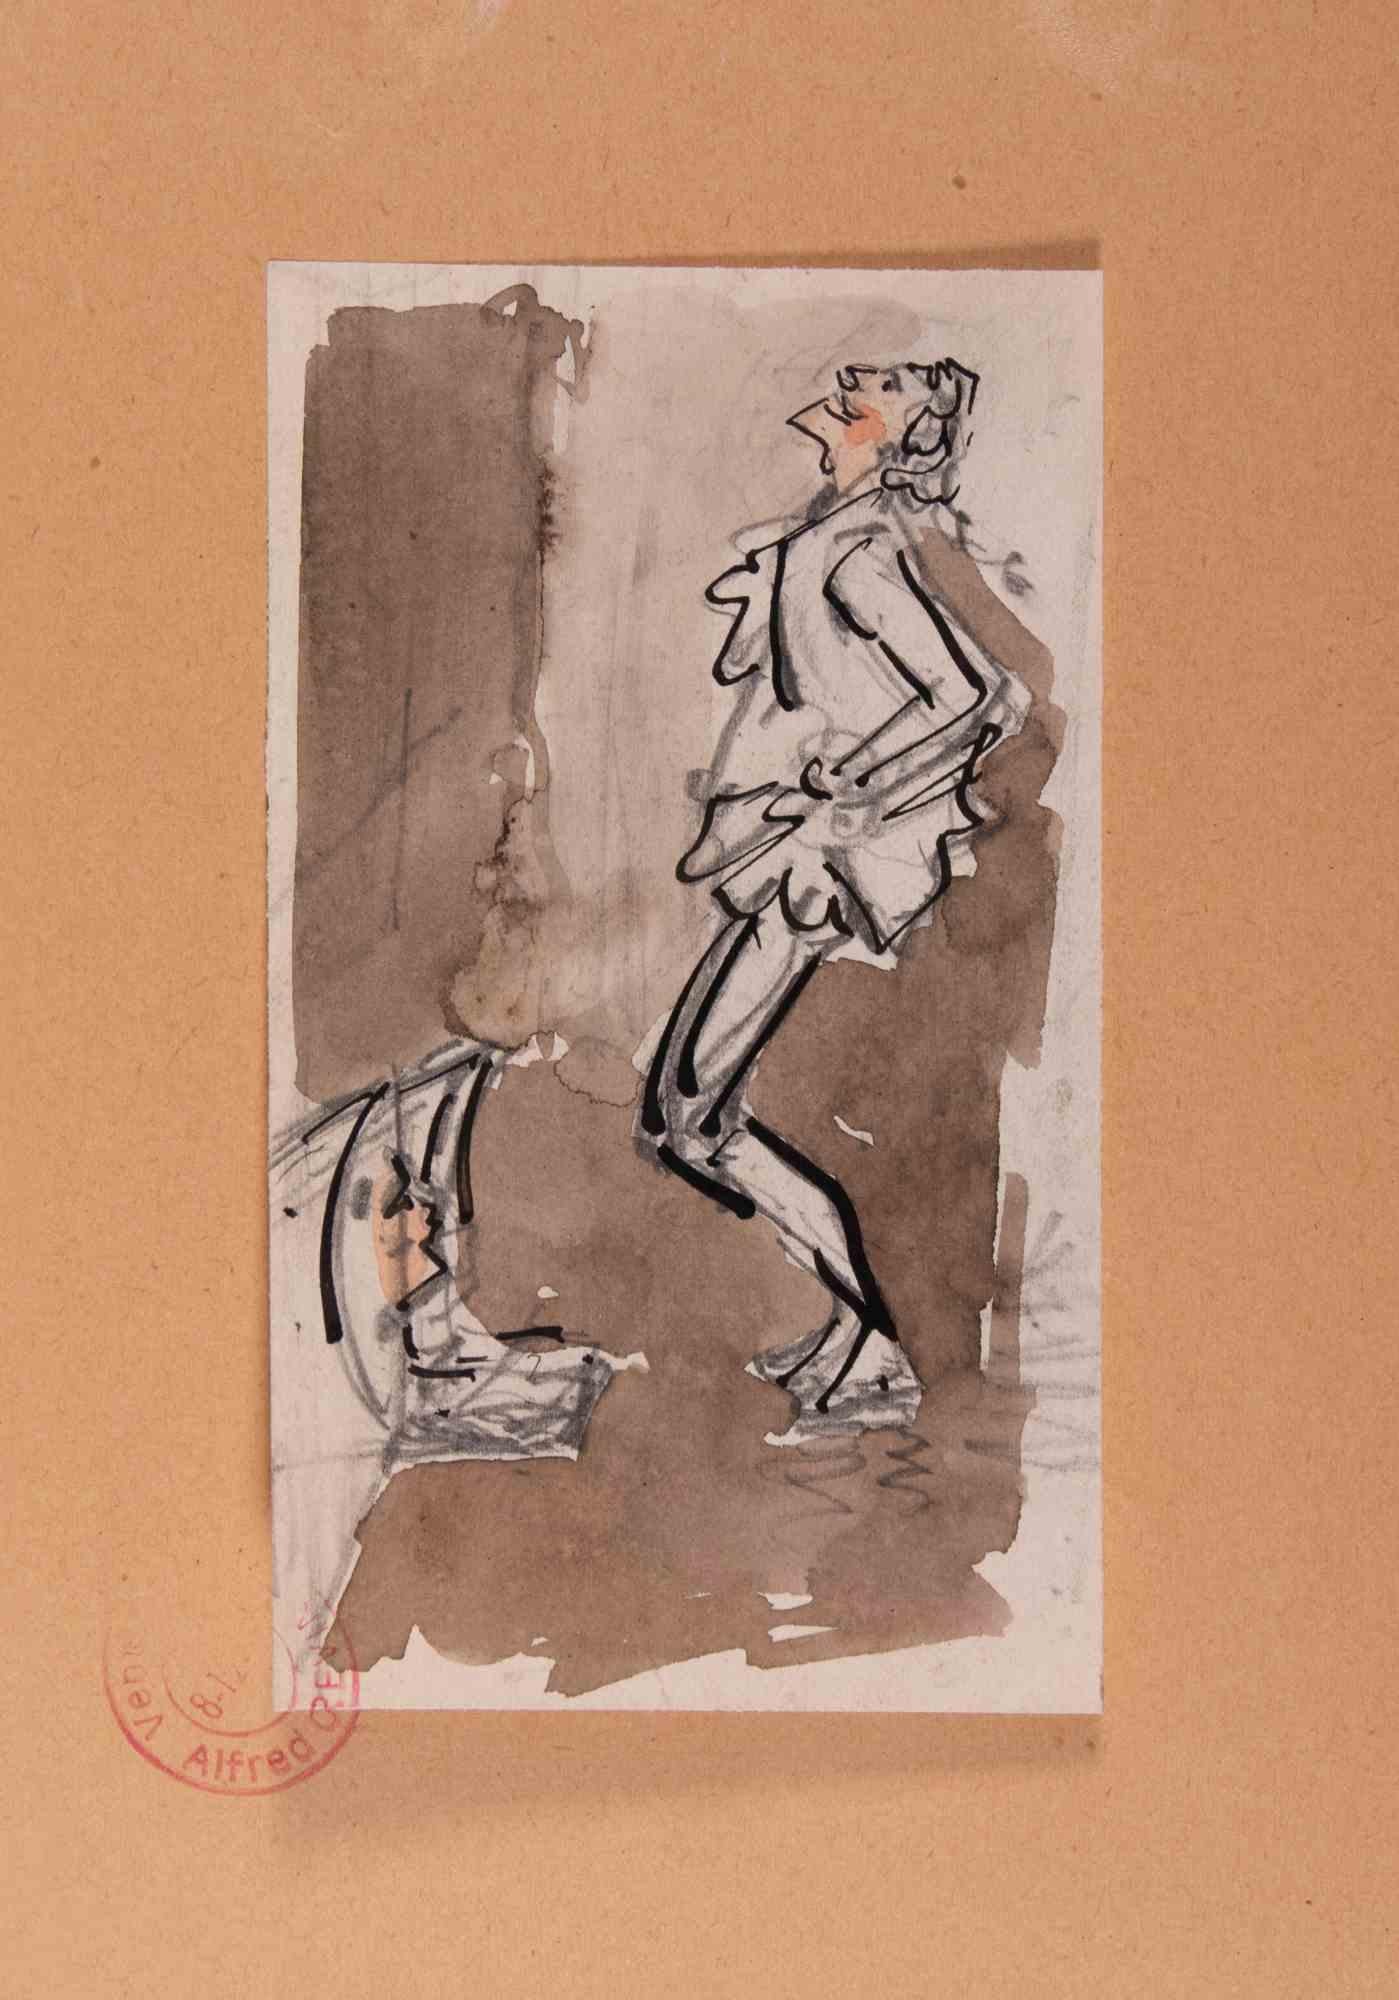 Figure is an original drawing realized by Alfred Grévin in the Late-19 Century.

With the stamp of atelier "Grevin" on the lower right.

In good conditions.

Alfred Grévin  (1827- 1892),was a 19th-century caricaturist, best known during his lifetime